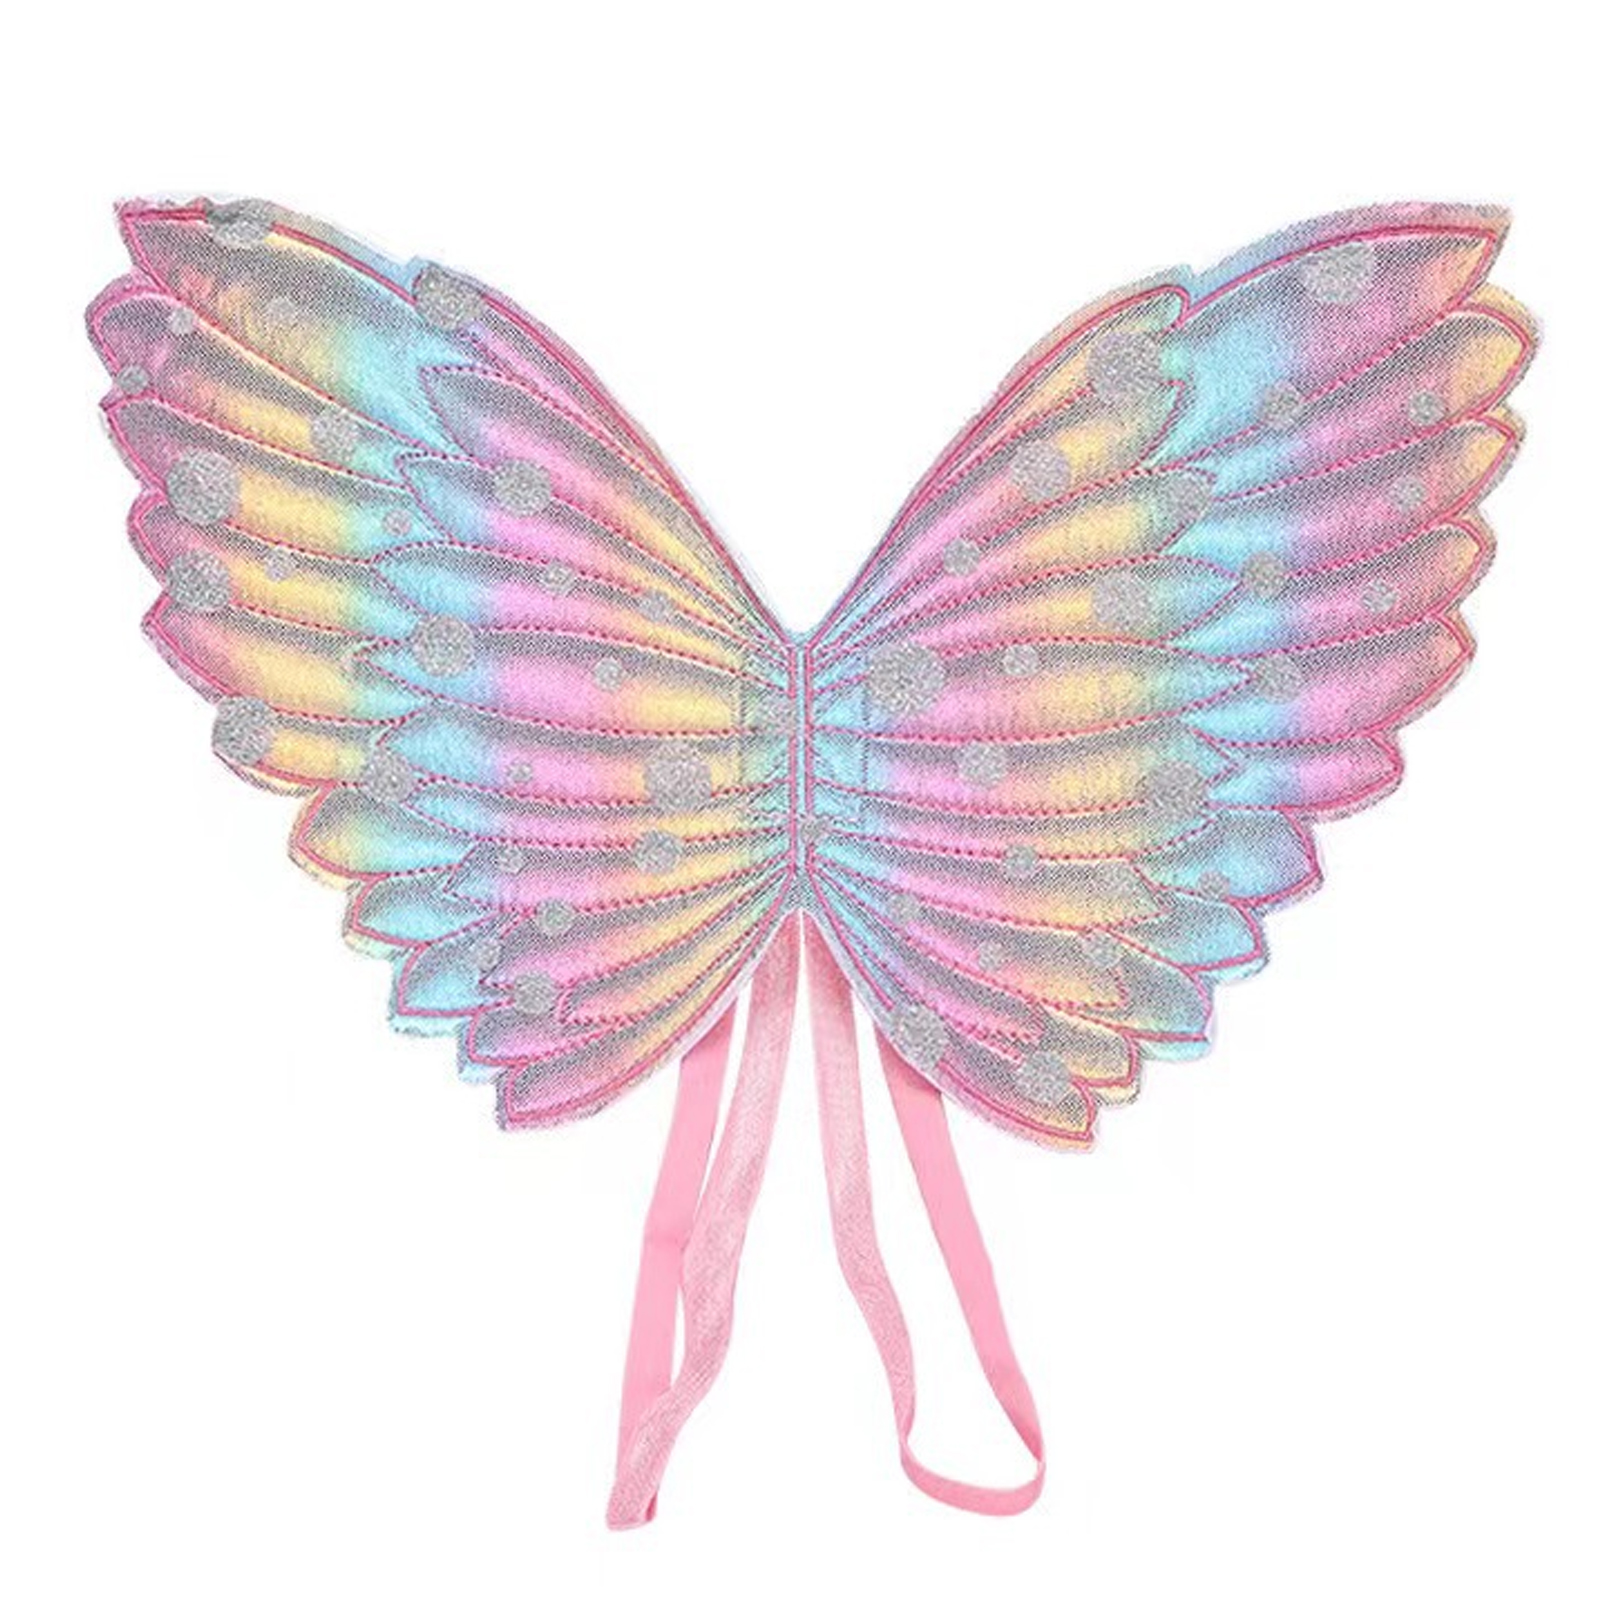 Whimsical Butterfly Wing Accessory for Children Beautiful and Easy-to